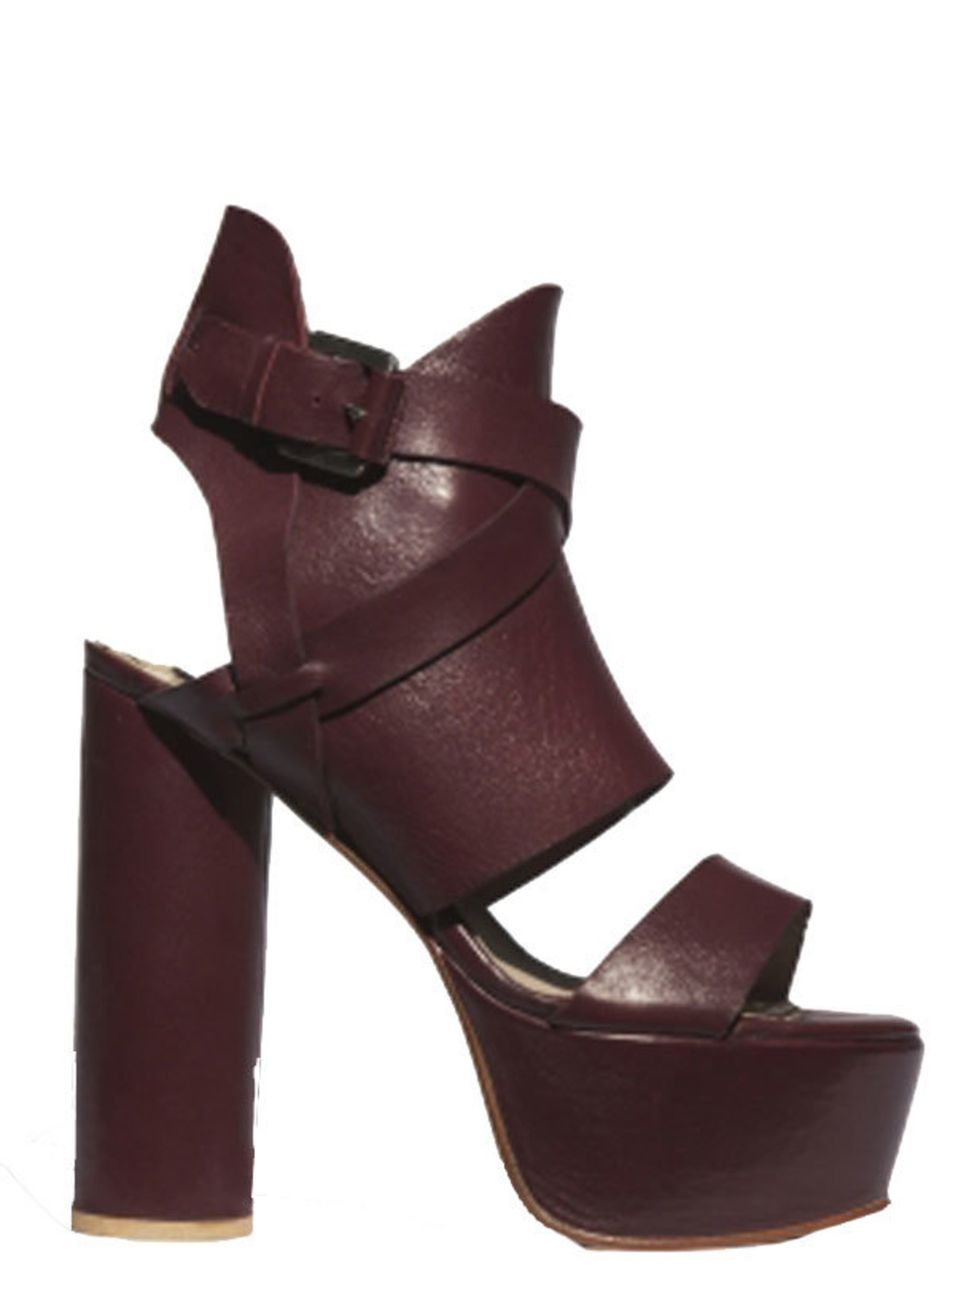 <p><a href="http://www.surfacetoair.com/store/?pg=style&amp;collection_id=43&amp;style_id=18">Surface to Air</a> buckled leather and suede wedge sandal, £330</p>